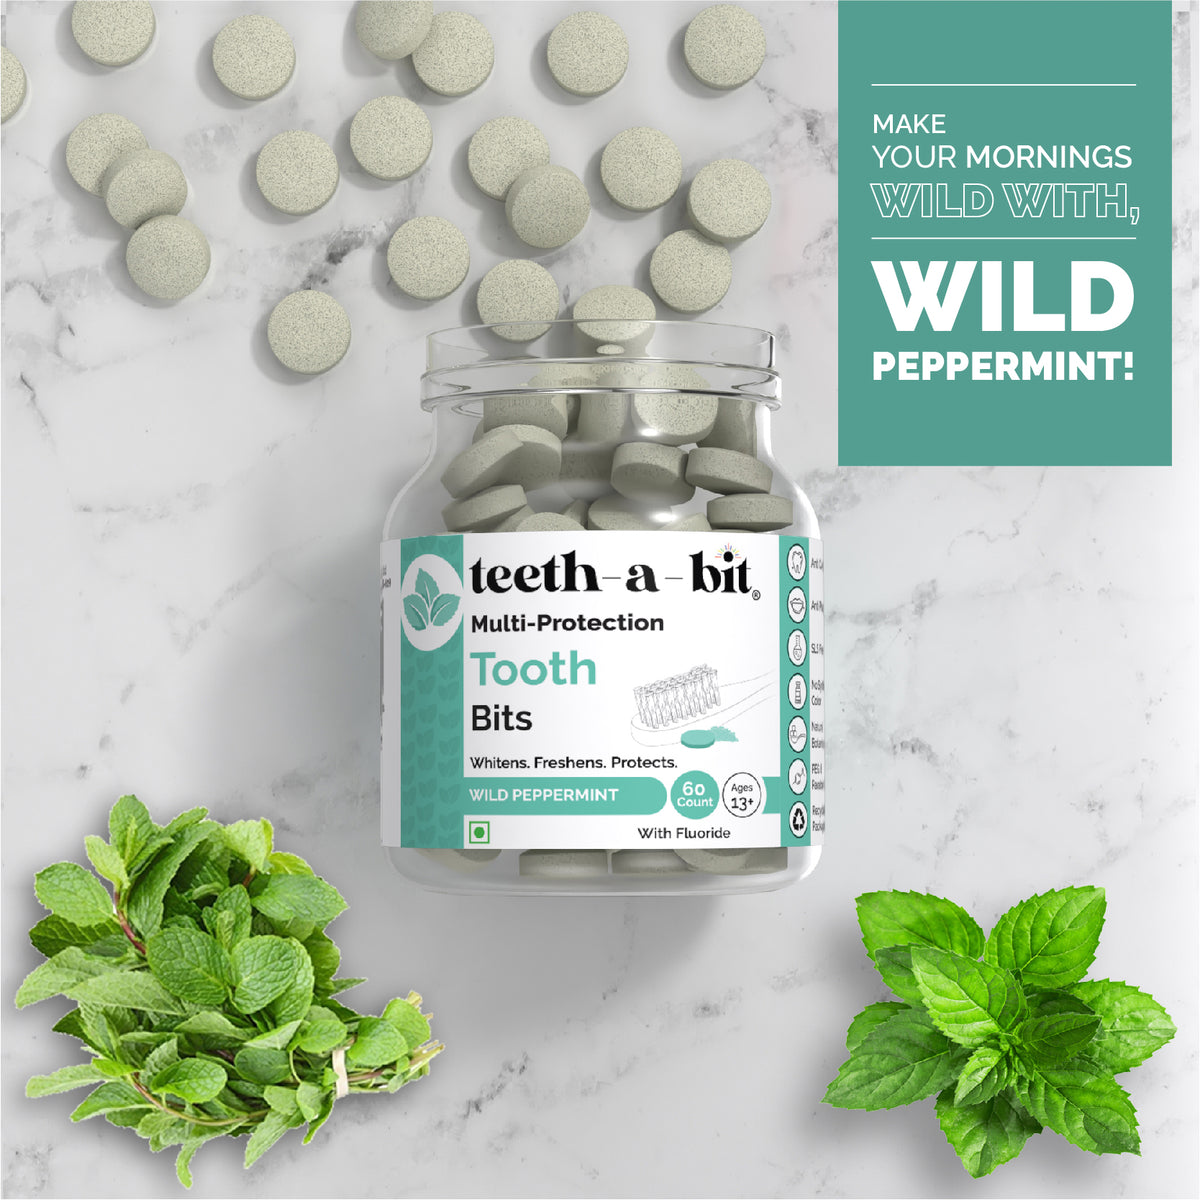 teeth-a-bit Multi-Protection Wild Peppermint Tooth Bits, SLS Free Plant Based Toothpaste Tablets (60 Count)